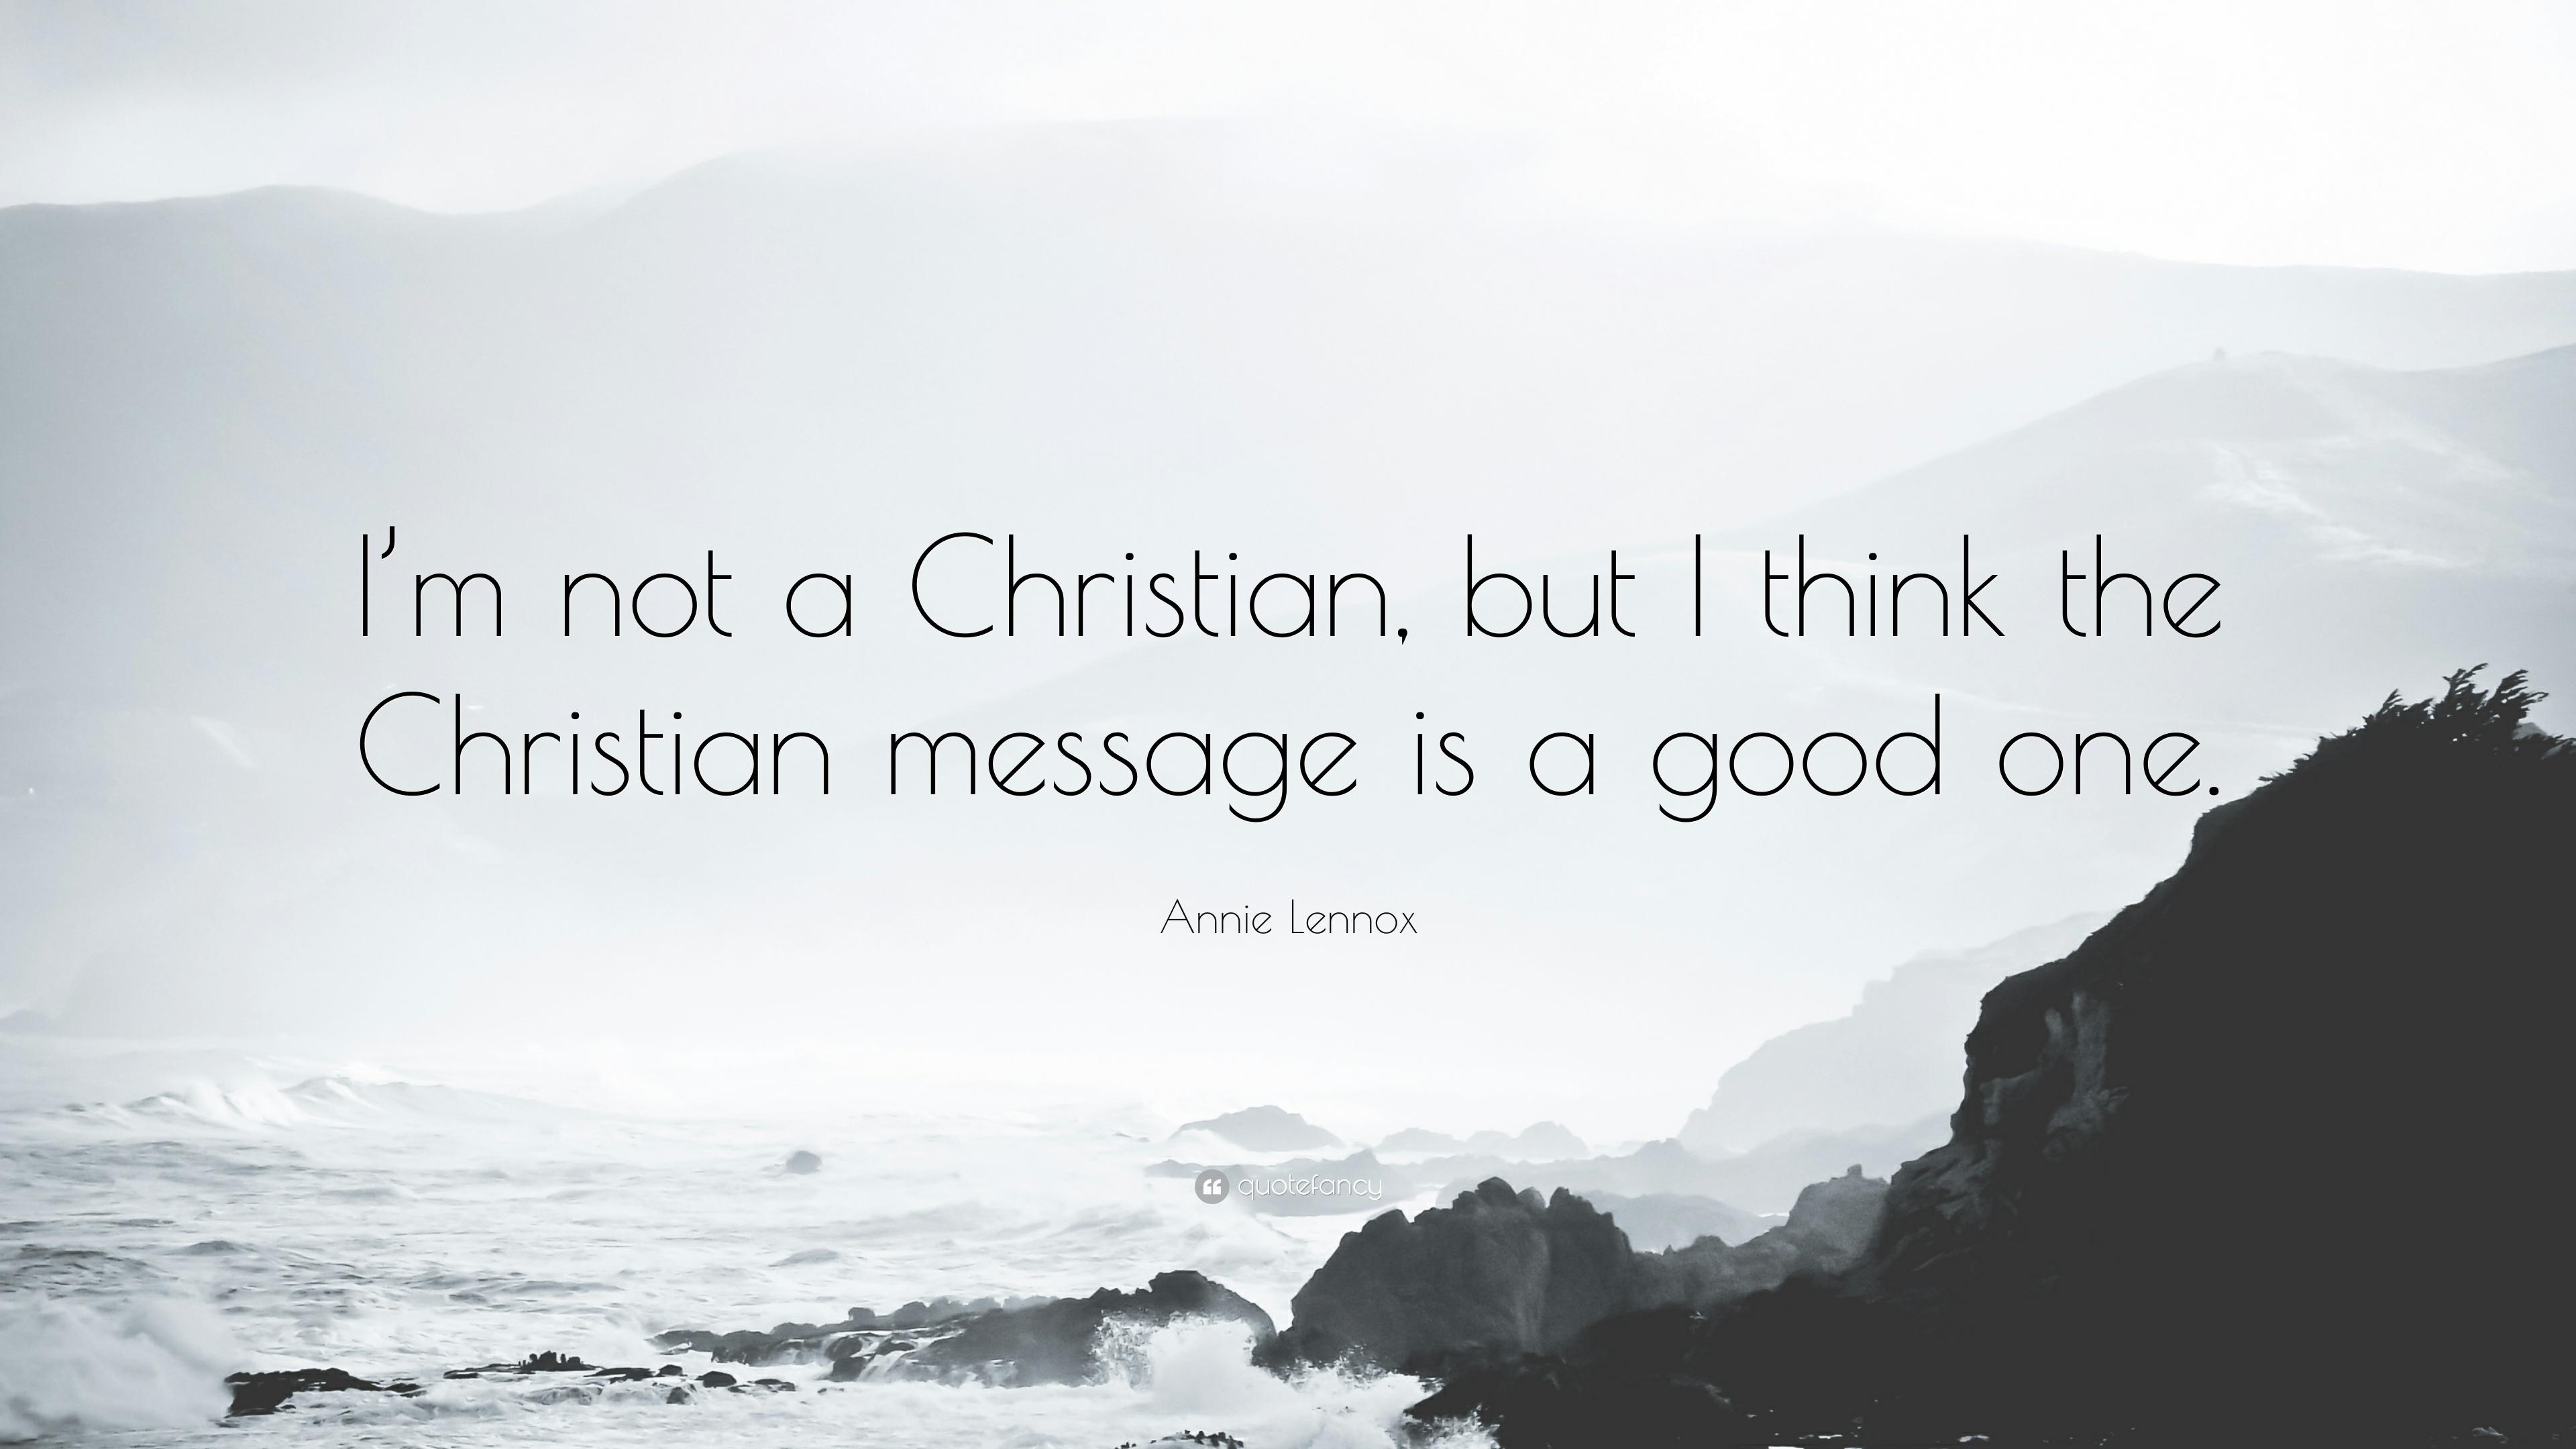 Annie Lennox Quote: “I'm not a Christian, but I think the Christian